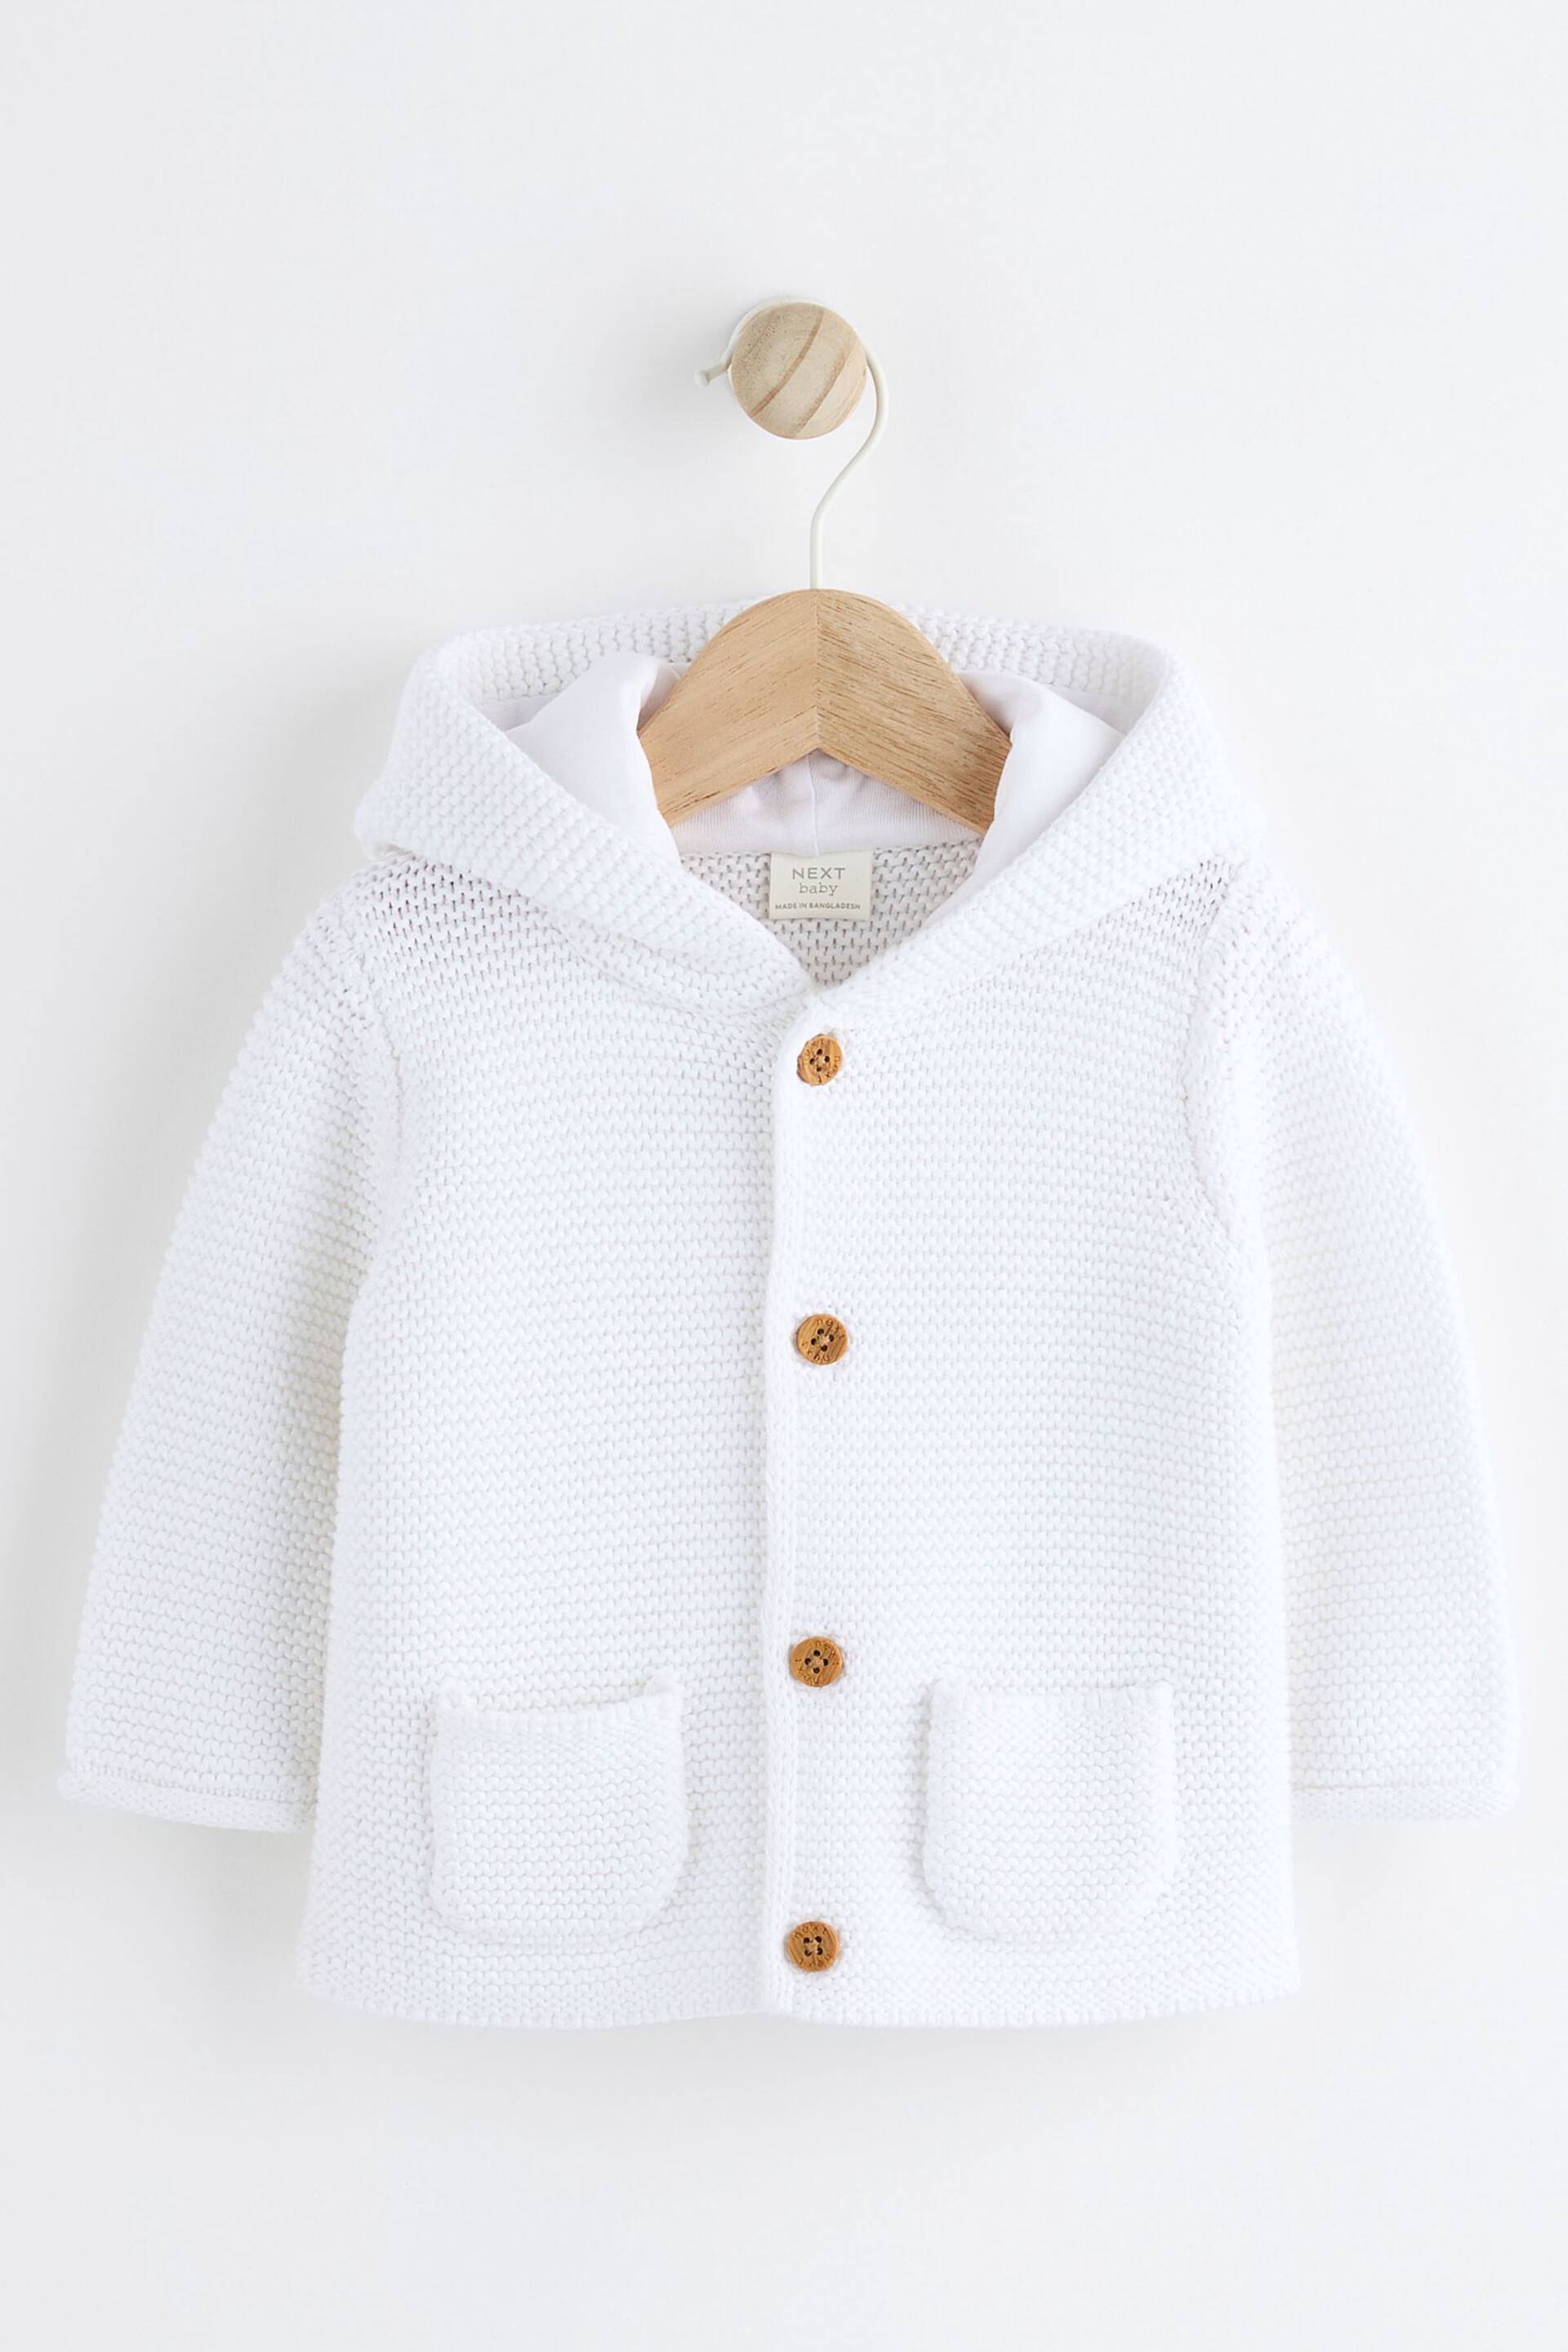 White Knitted Baby Cardigan - Image 1 of 5